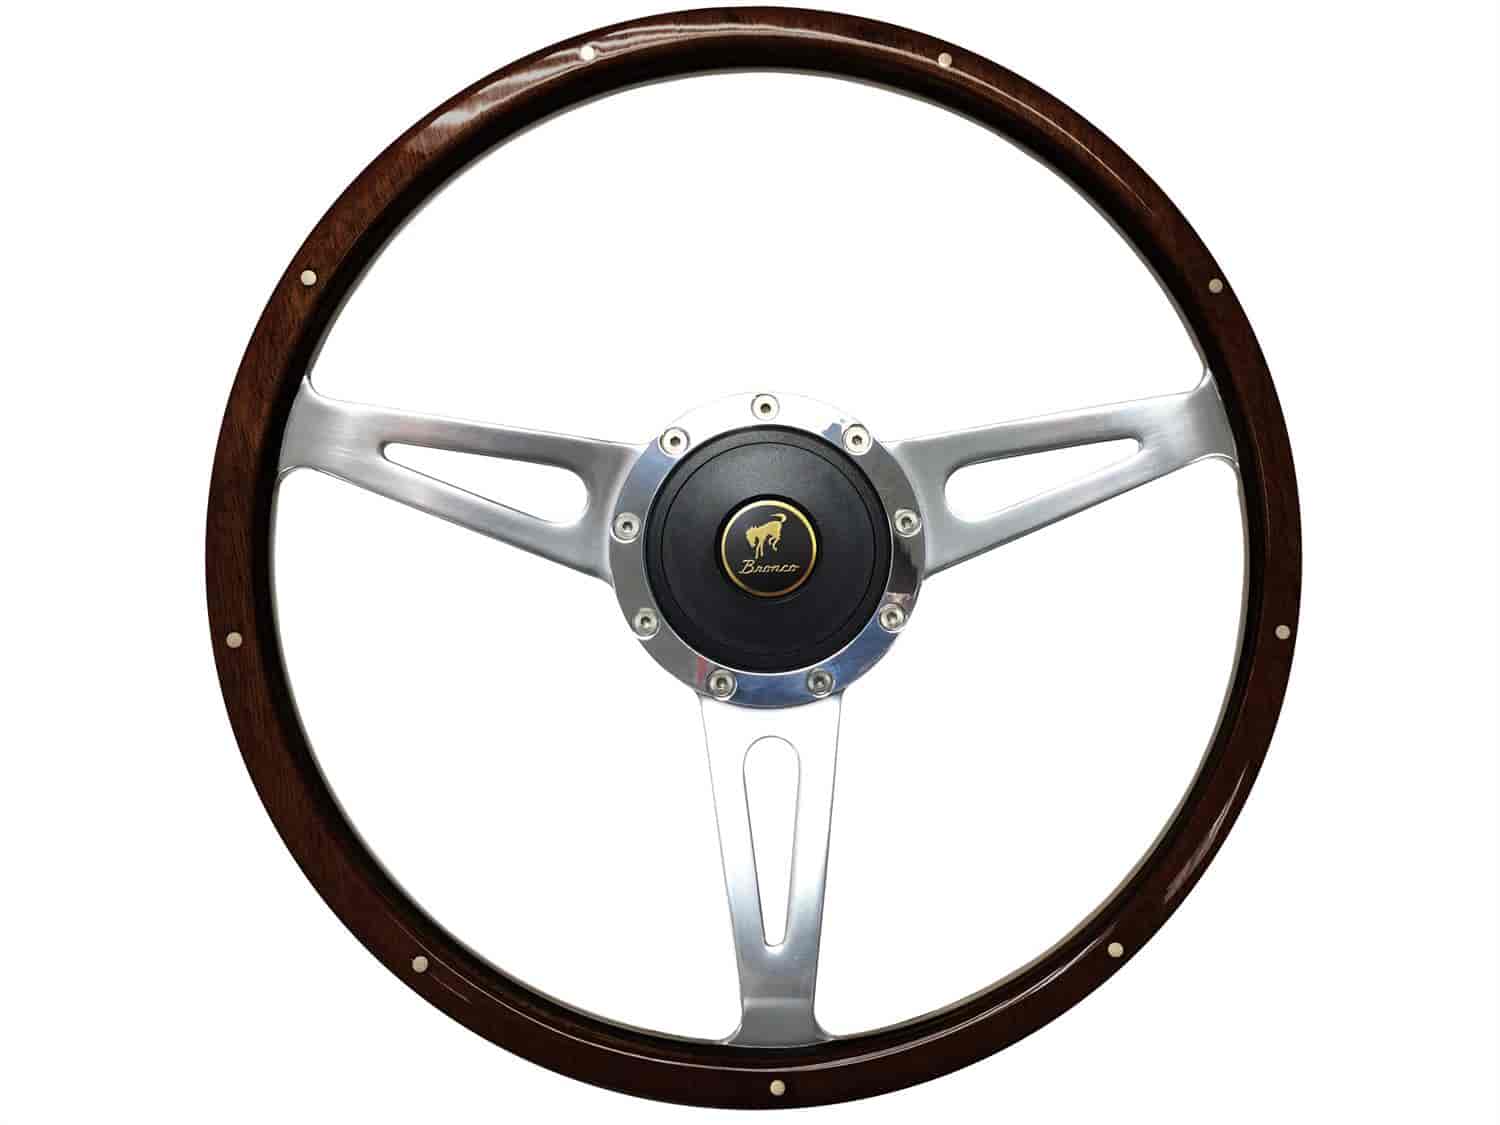 S9 Classic Steering Wheel Kit 1968-91 Ford/Mercury, 15 in. Diameter, Espresso Stained Wood Grip, w/ 9-Bolt Adapter & Horn Button